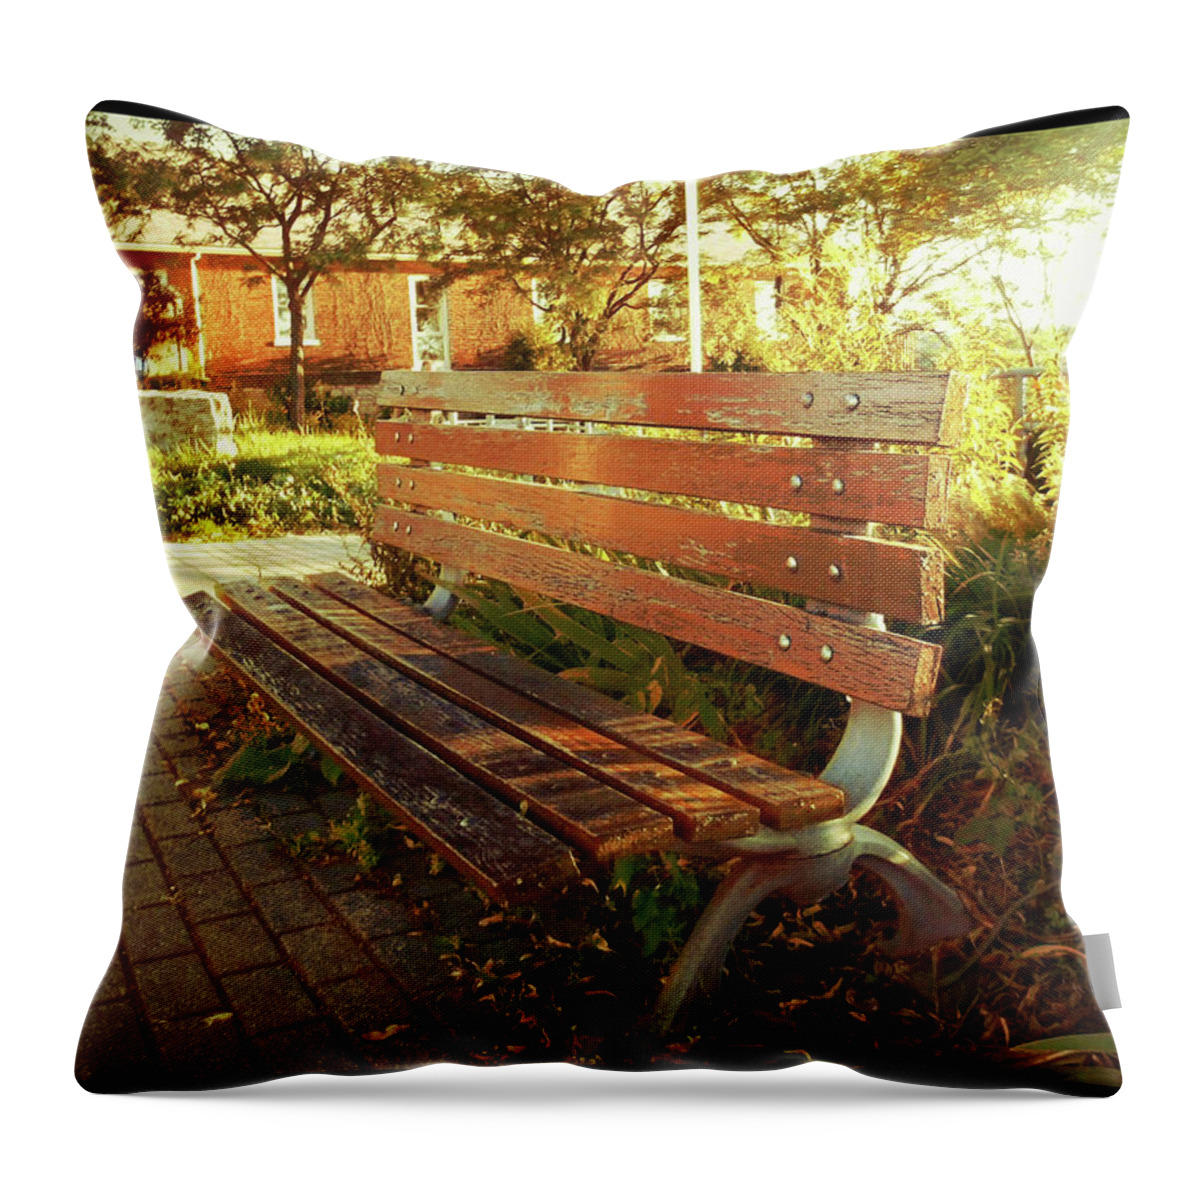 Bench Throw Pillow featuring the photograph A Restful Respite by Shawn Dall